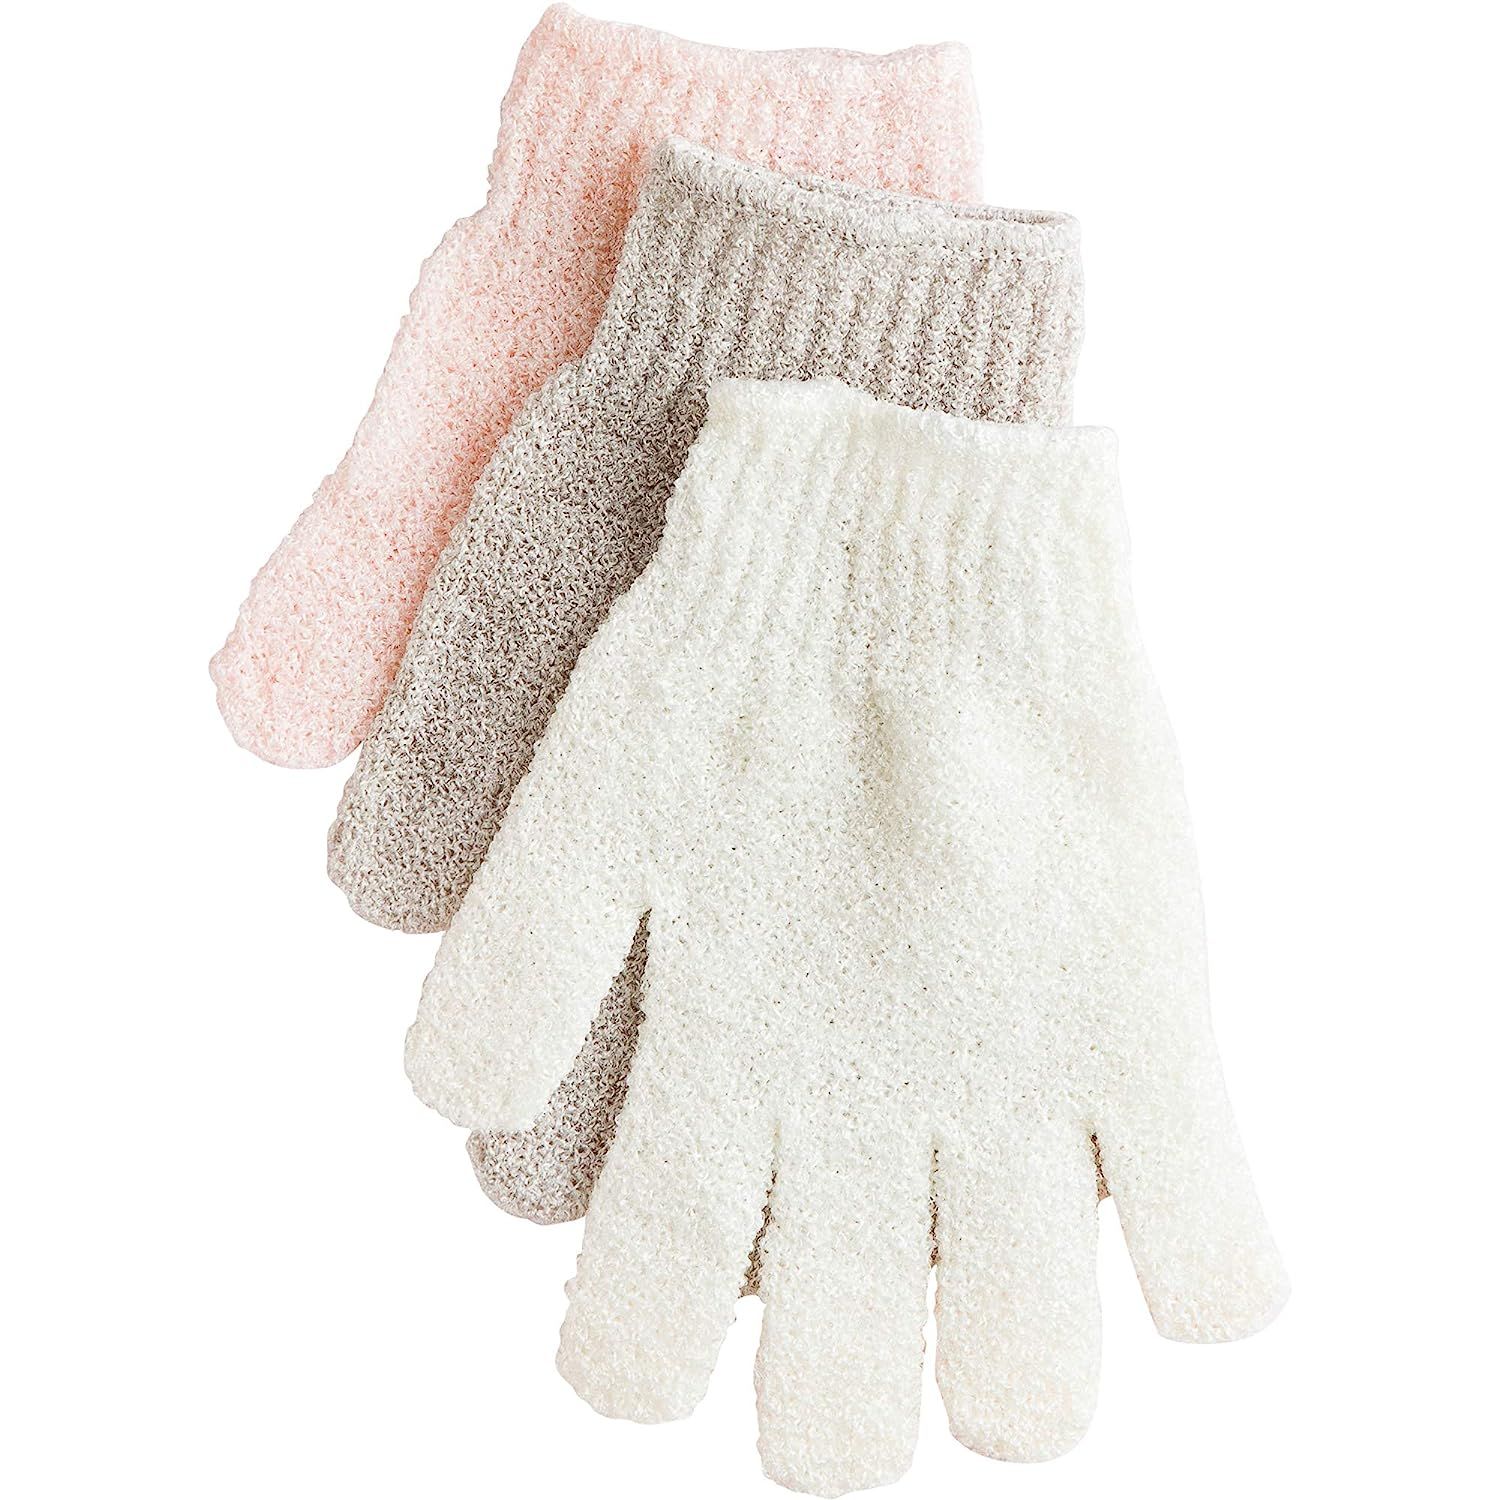 Urbana Exfoliating Gloves for Shower, Bath, and Cleansing – Assorted Colors, 1 Pair | Amazon (US)